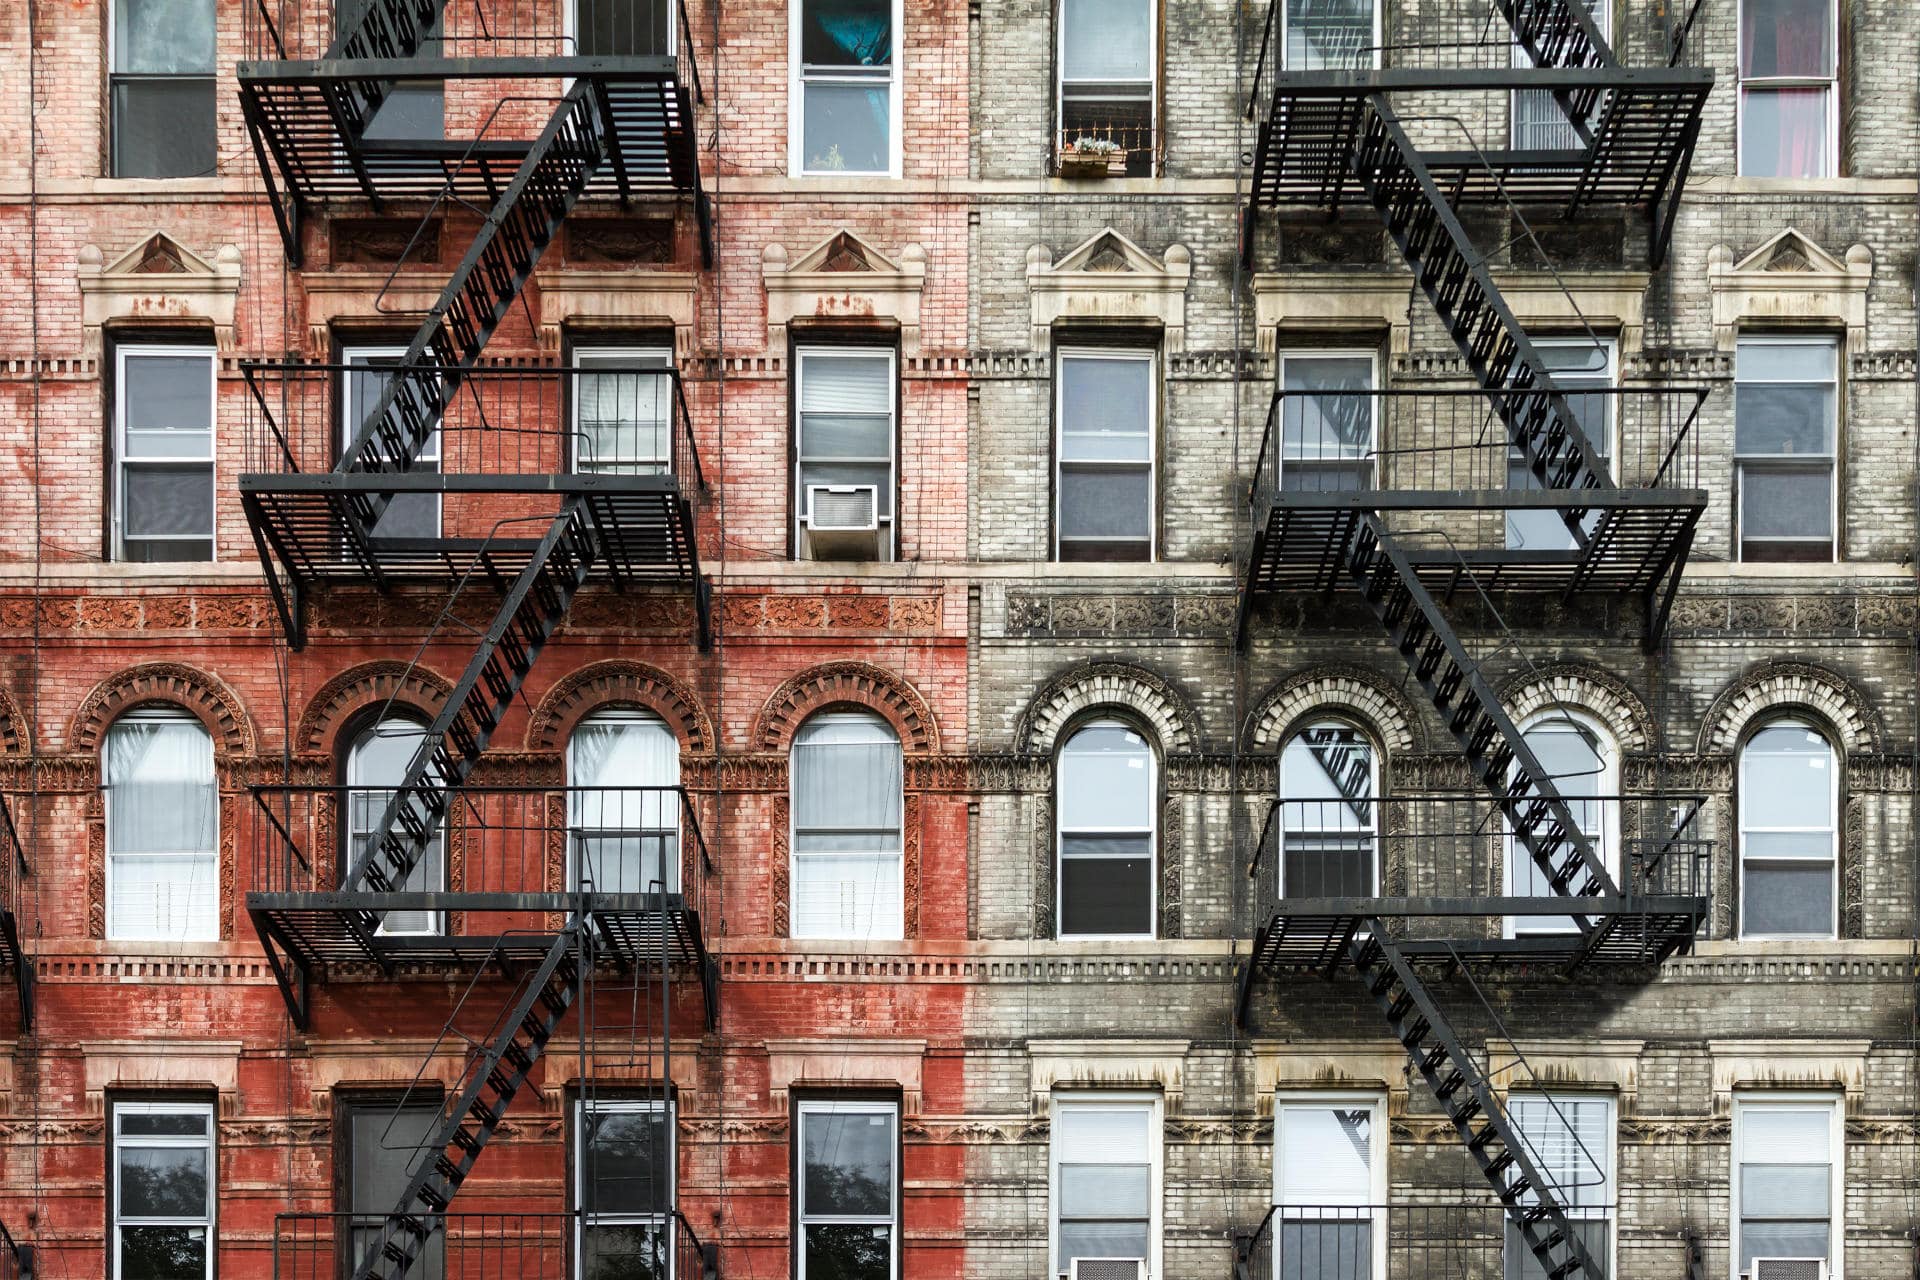 Old Brick Apartment Buildings in New York City